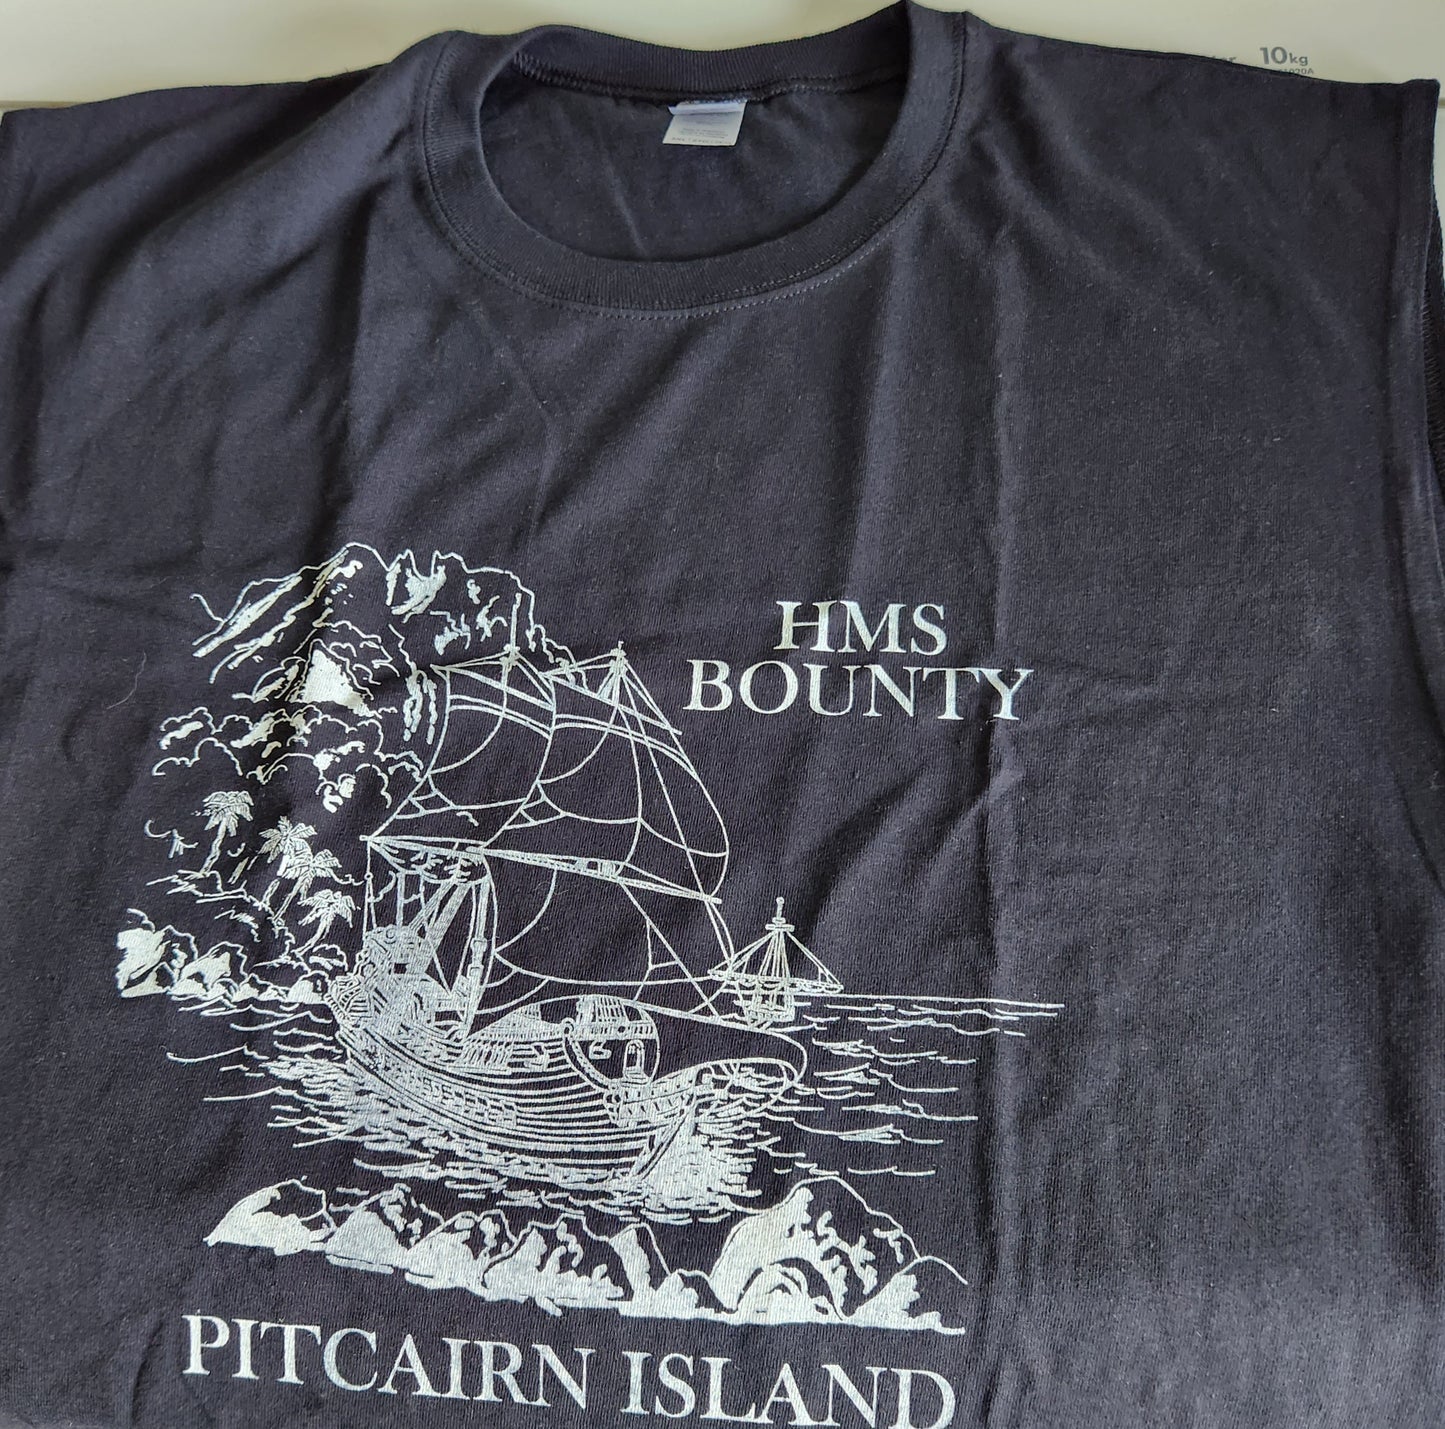 Pitcairn Muscle T. with HMAV Bounty Print - Mens